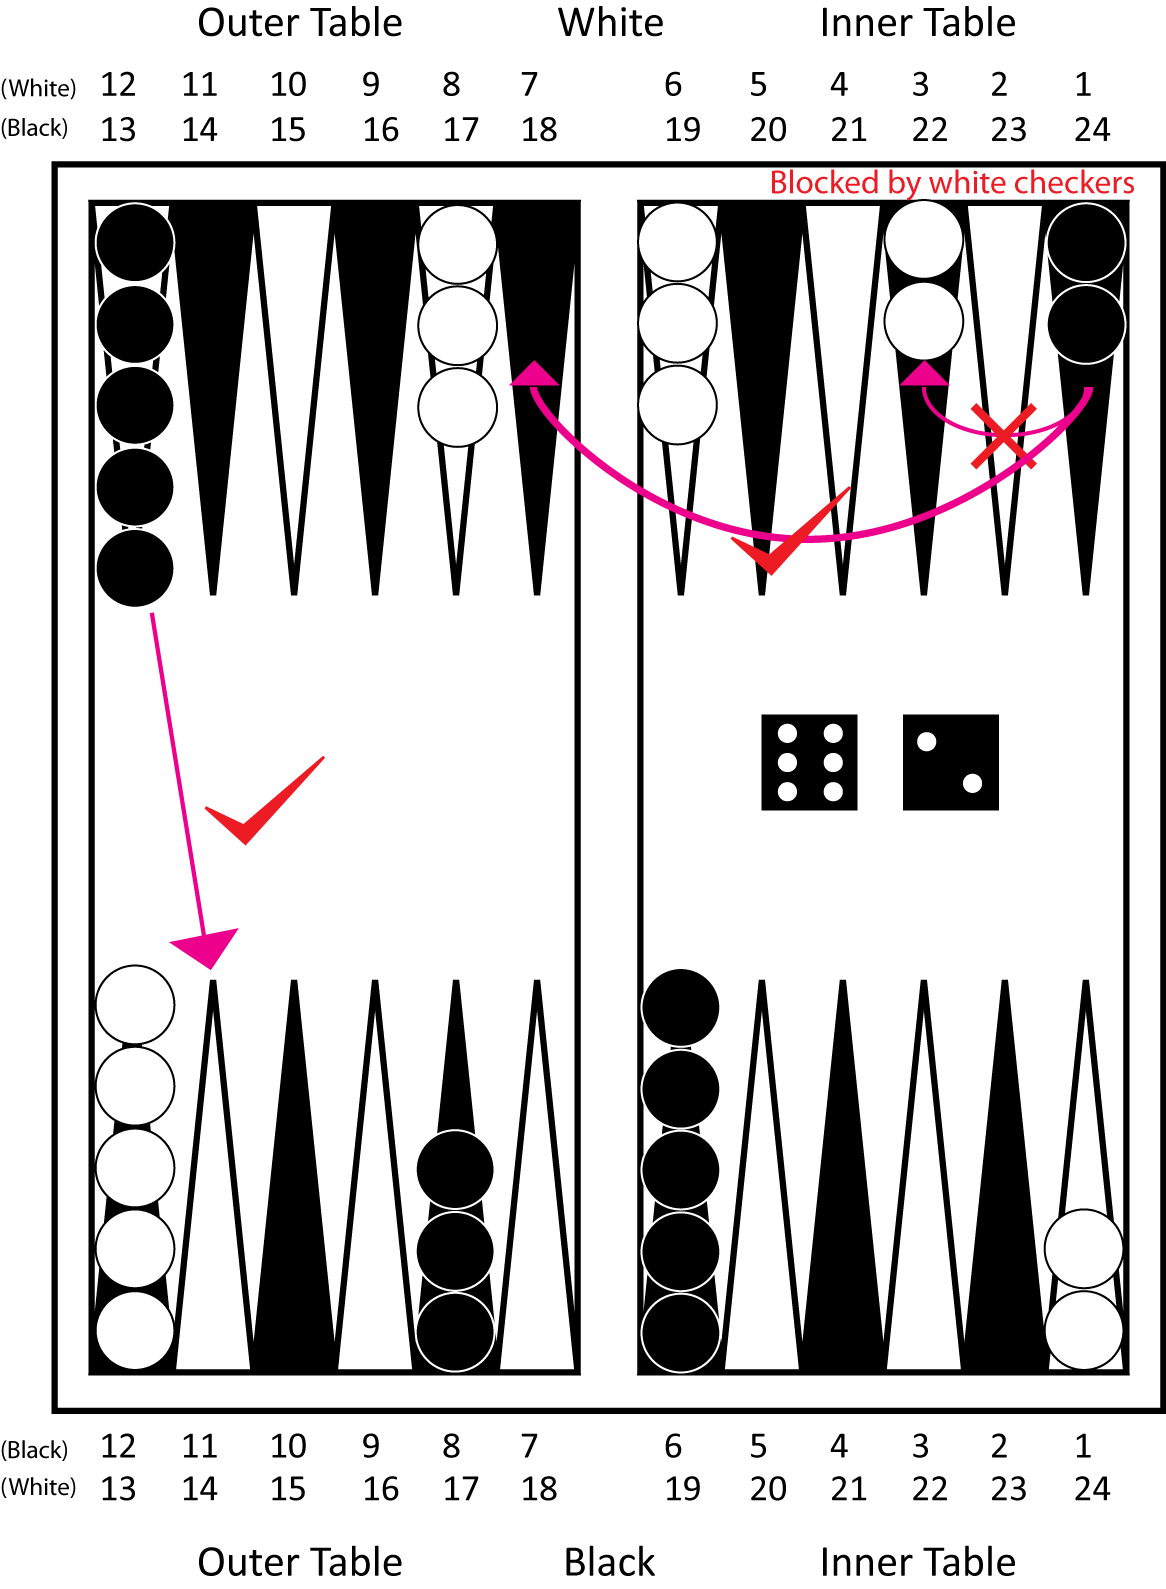 Rules For Backgammon